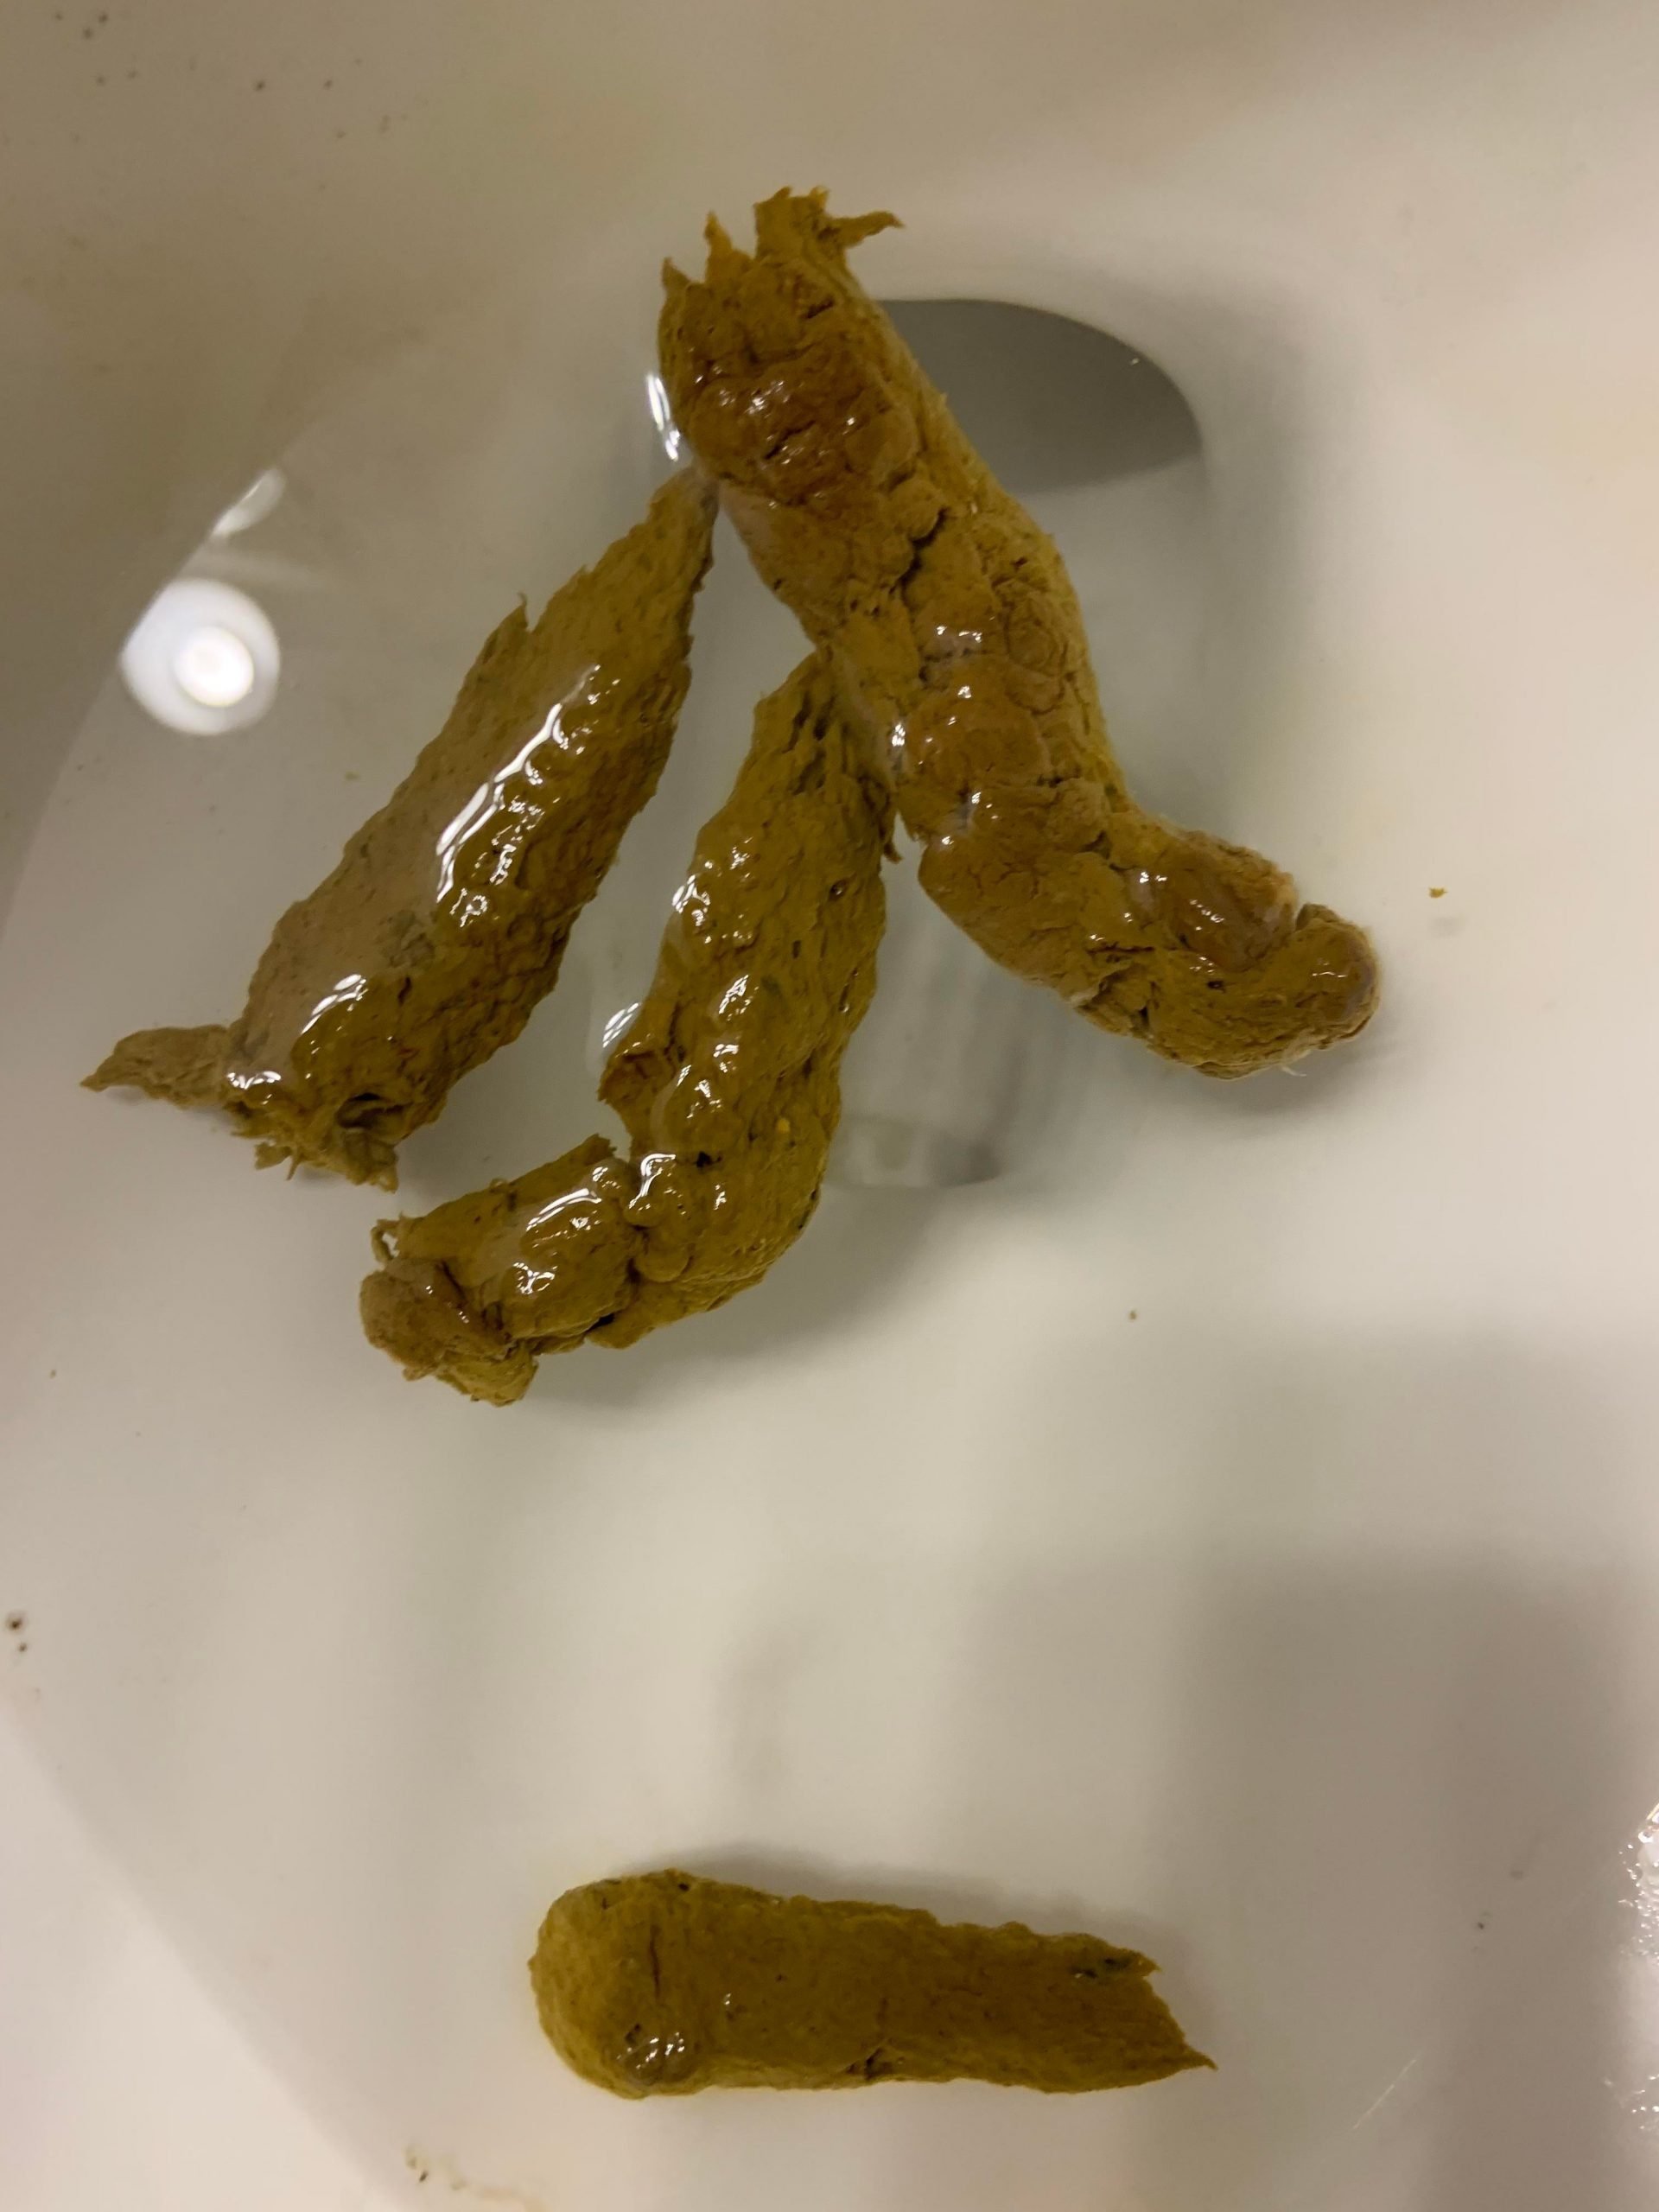 Warning Poop: does this look like fatty stool? Normal diet and fecal ...